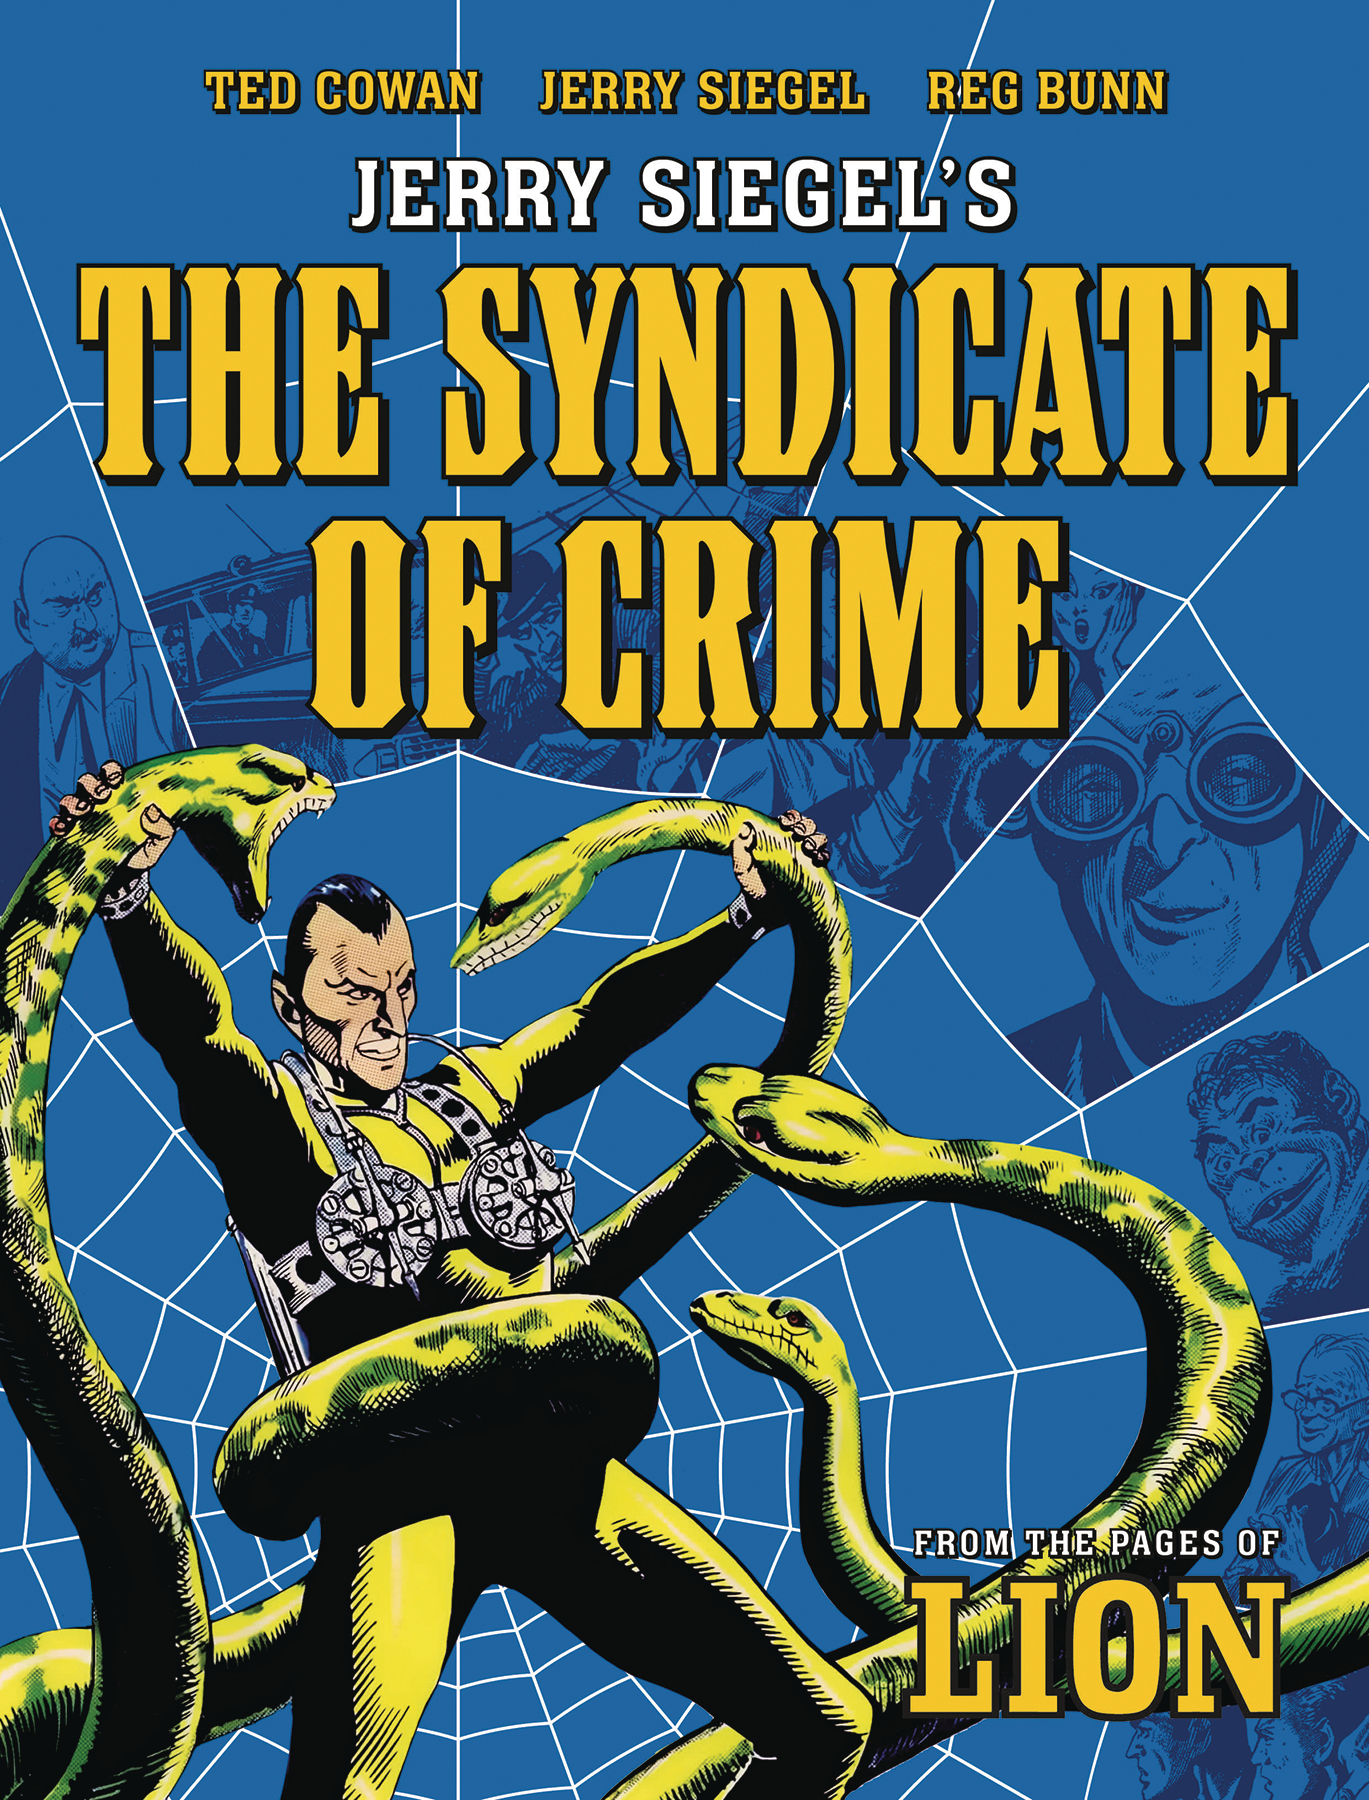 Siegels Syndicate of Crime Graphic Novel